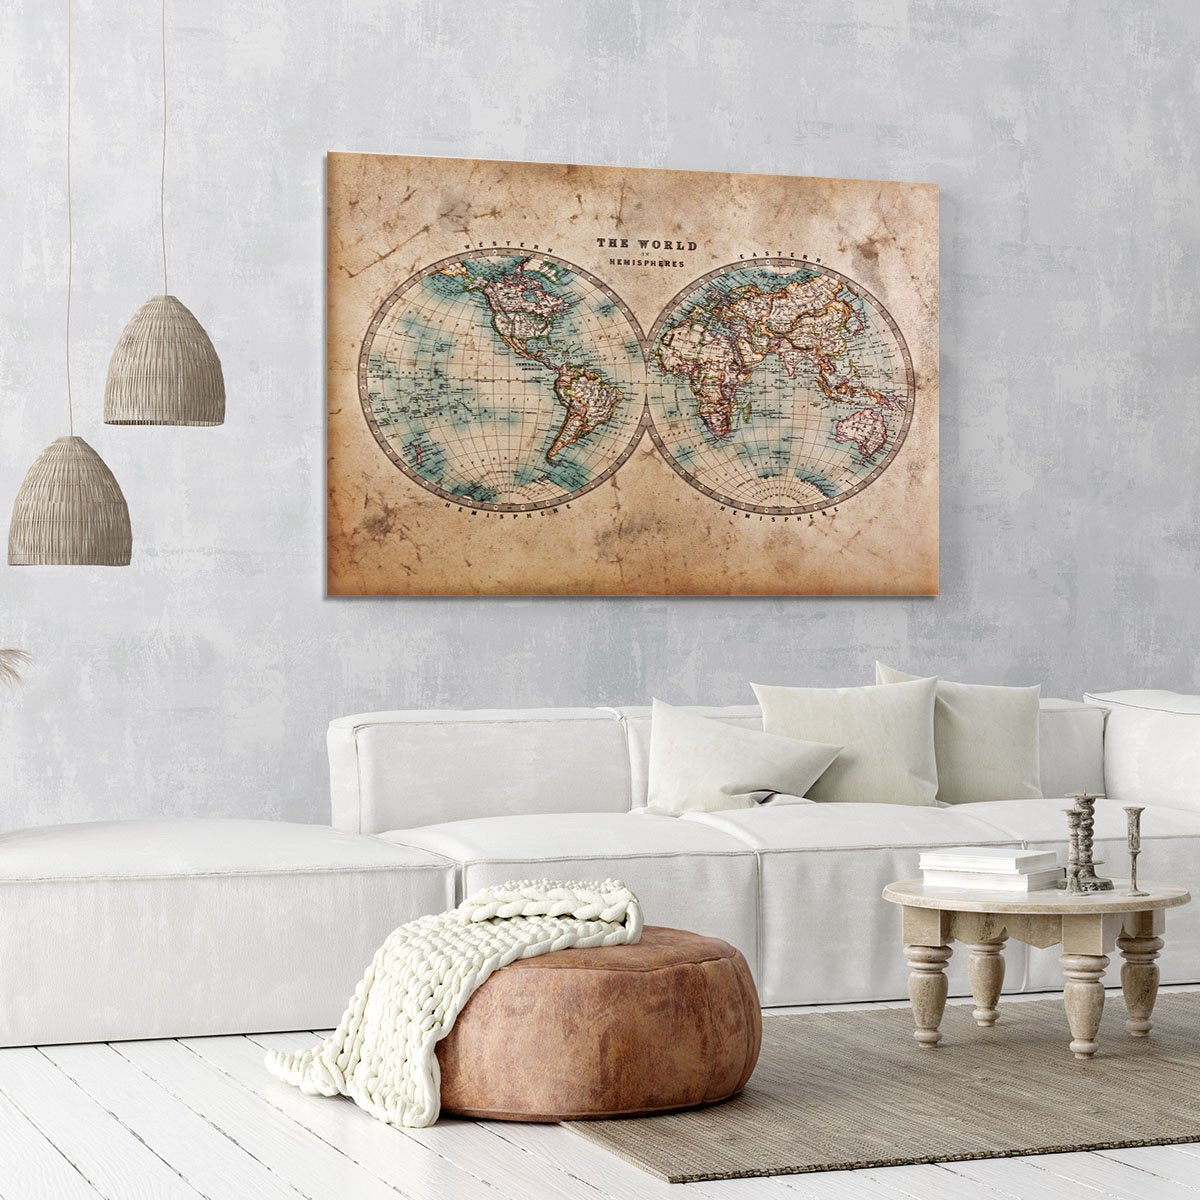 A genuine old stained World map Canvas Print or Poster